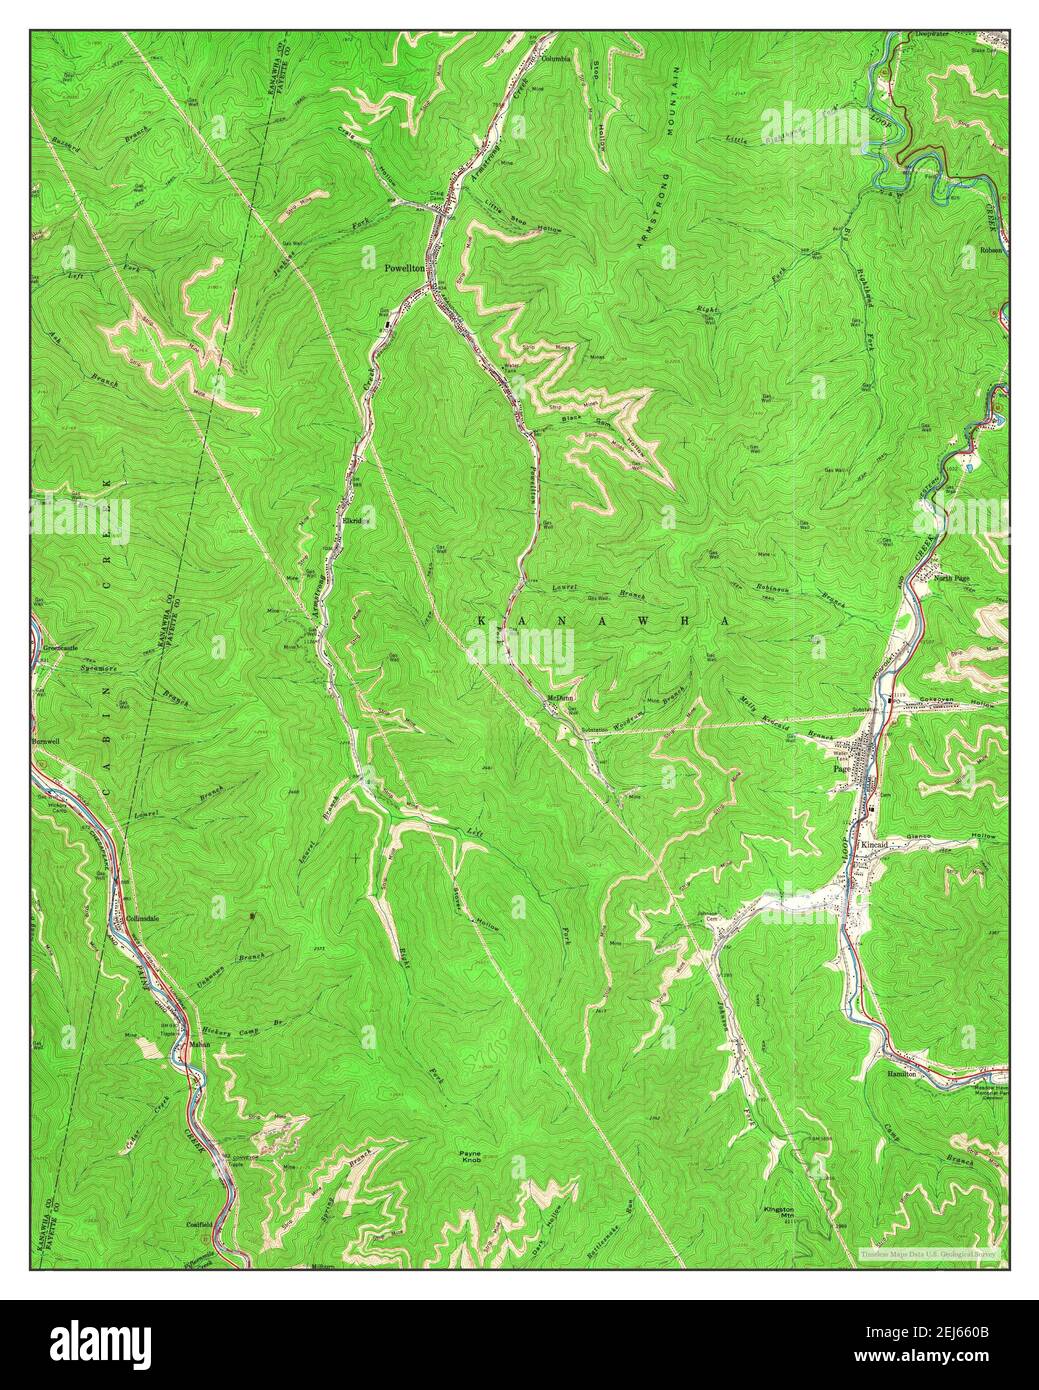 Powellton, West Virginia, map 1965, 1:24000, United States of America by Timeless Maps, data U.S. Geological Survey Stock Photo